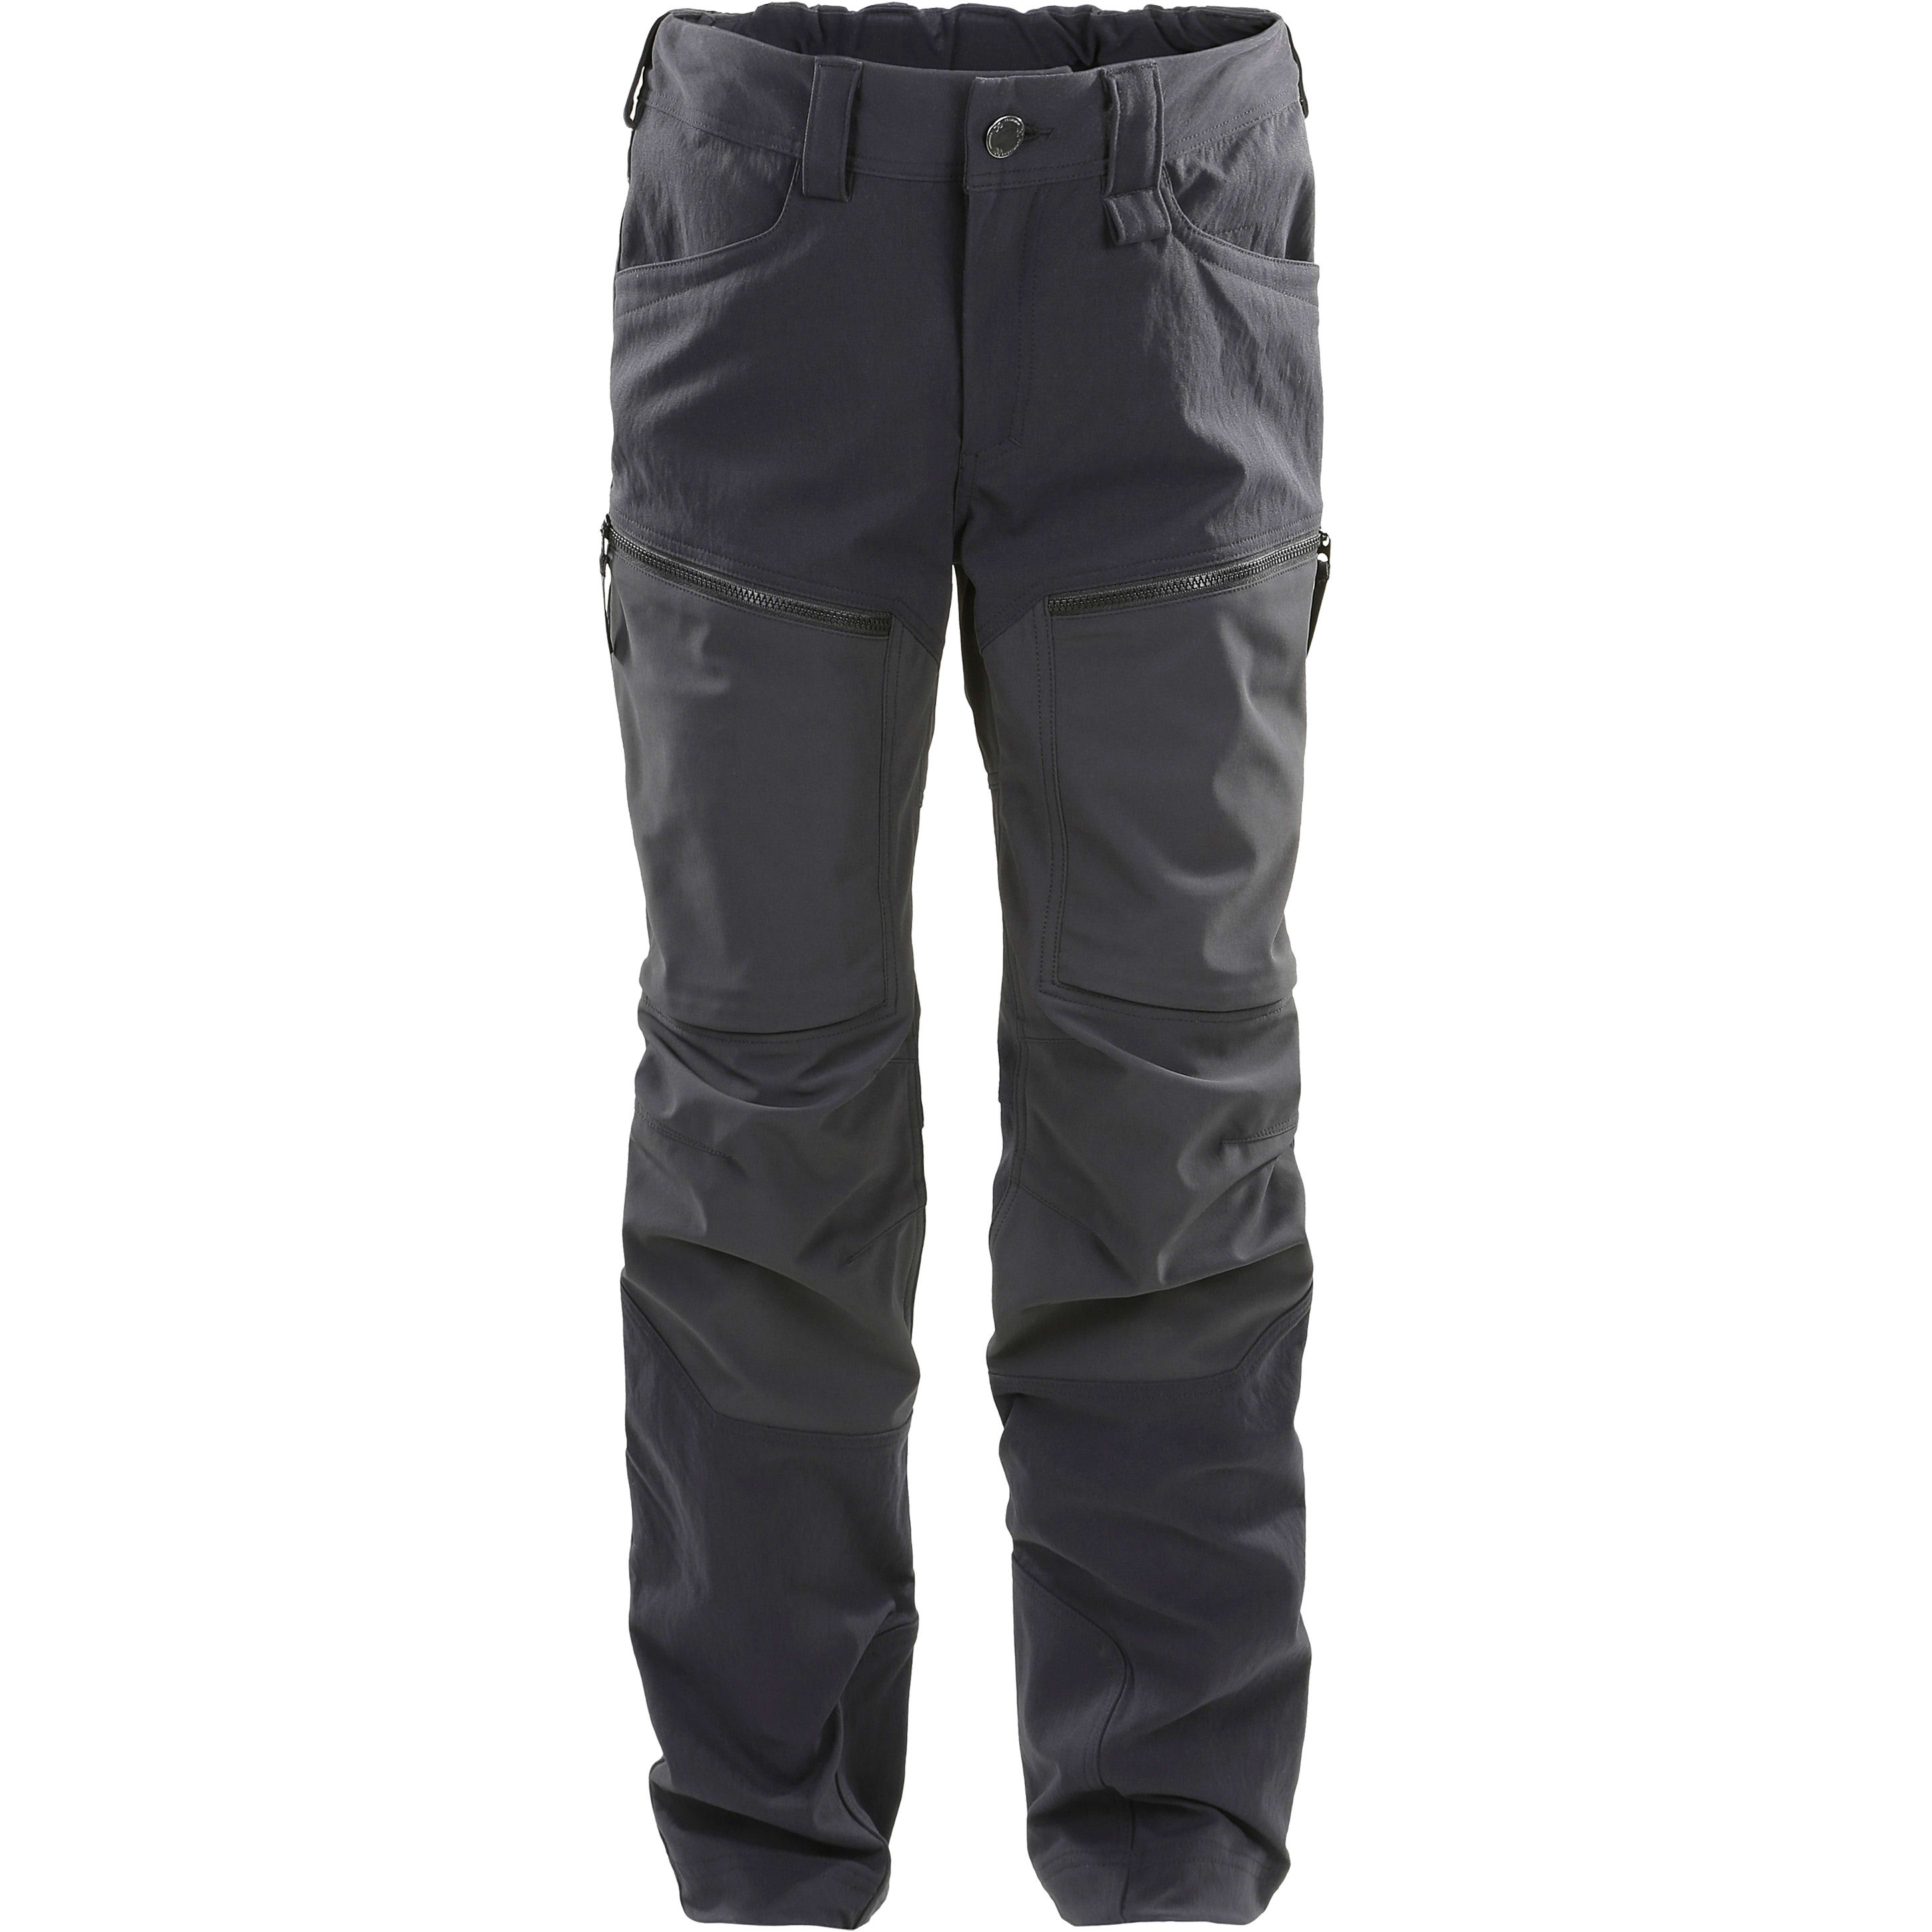 Buy Haglöfs Rugged Mountain Pant Junior (2018) from Outnorth